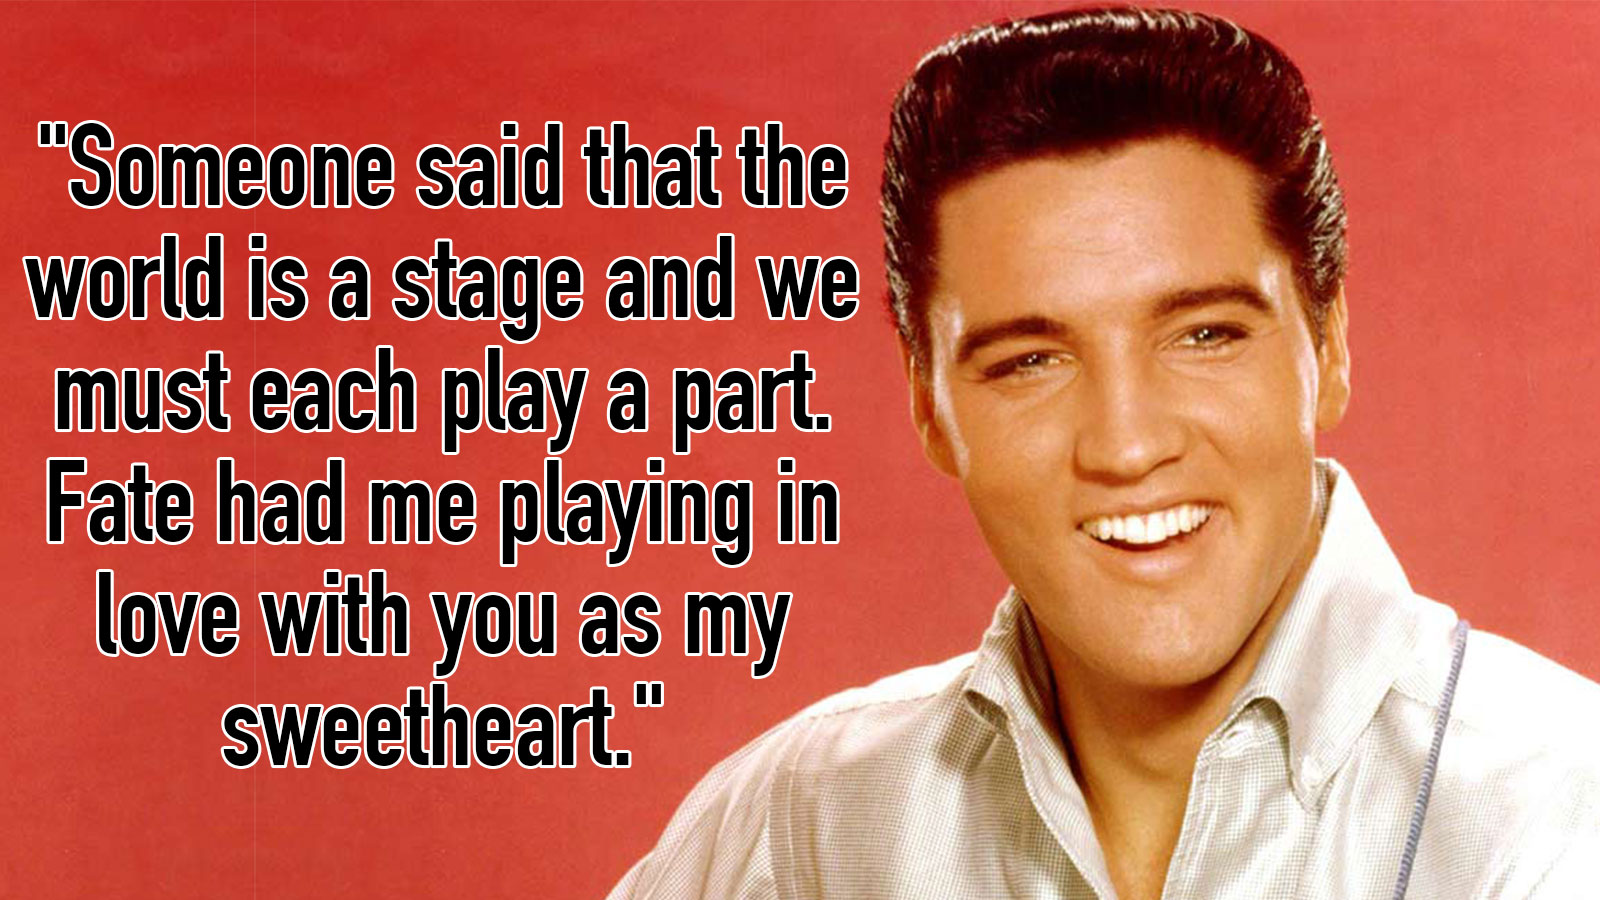 Can You Guess the Elvis Presley Song This Lyric Is From? Quiz 61